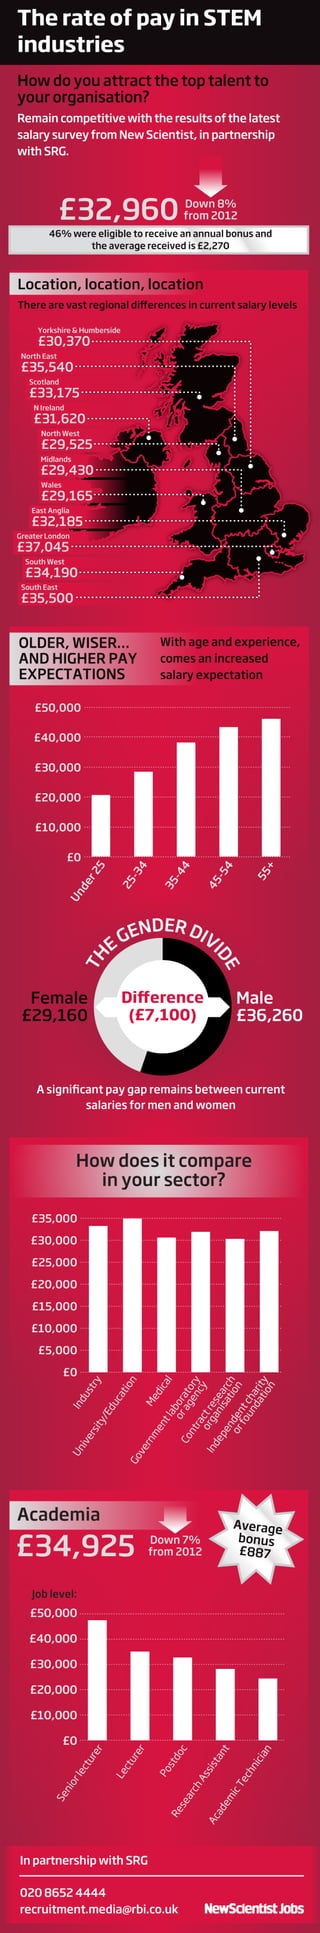 Rate of pay - New Scientist Salary Survey (Academic)